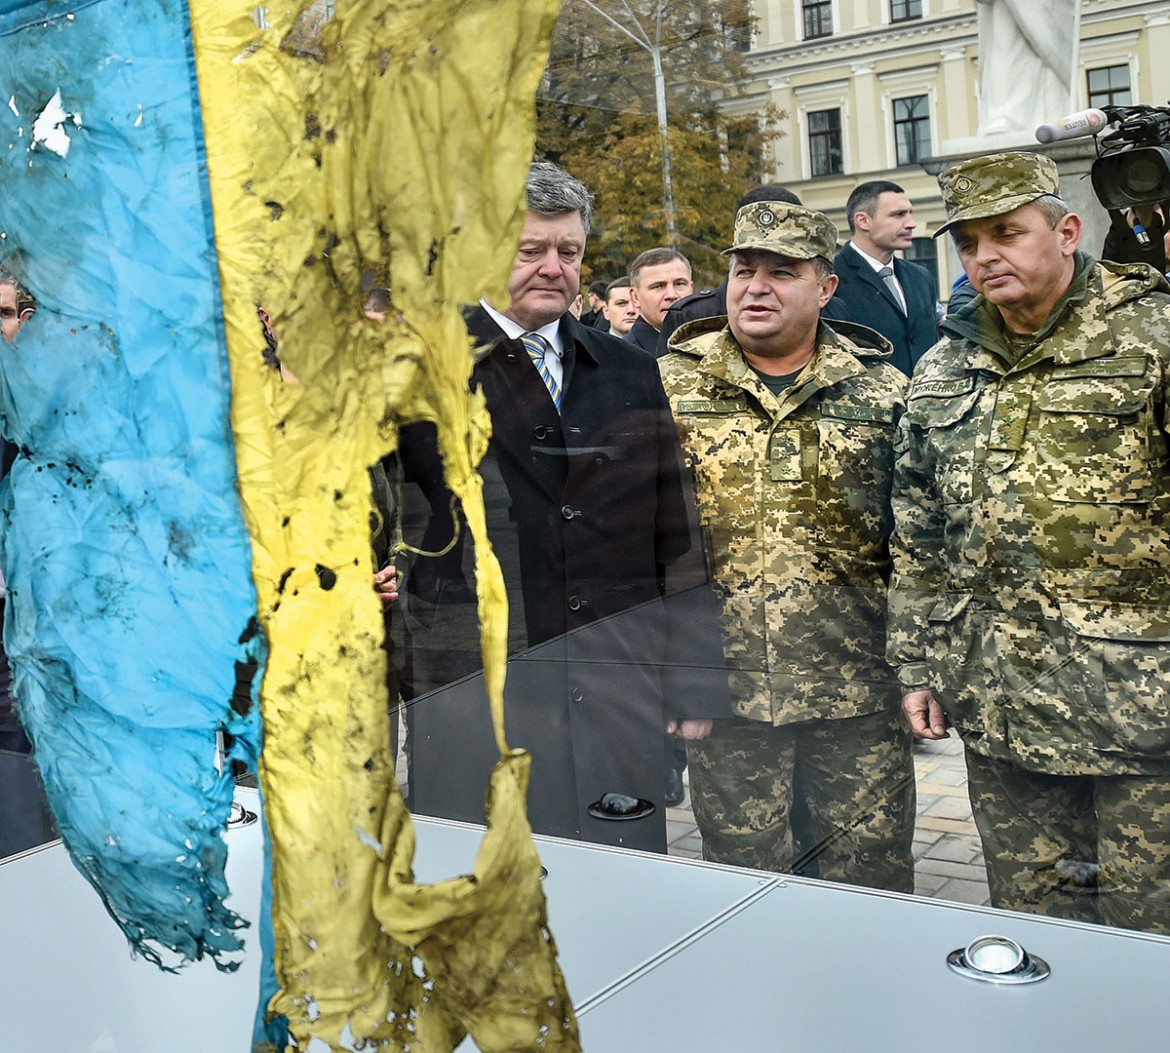 A flag from the battle of Ilovaisk that was on display as part of the exhibit “Power of the Unbroken” on Kyiv’s St. Michael’s Square.